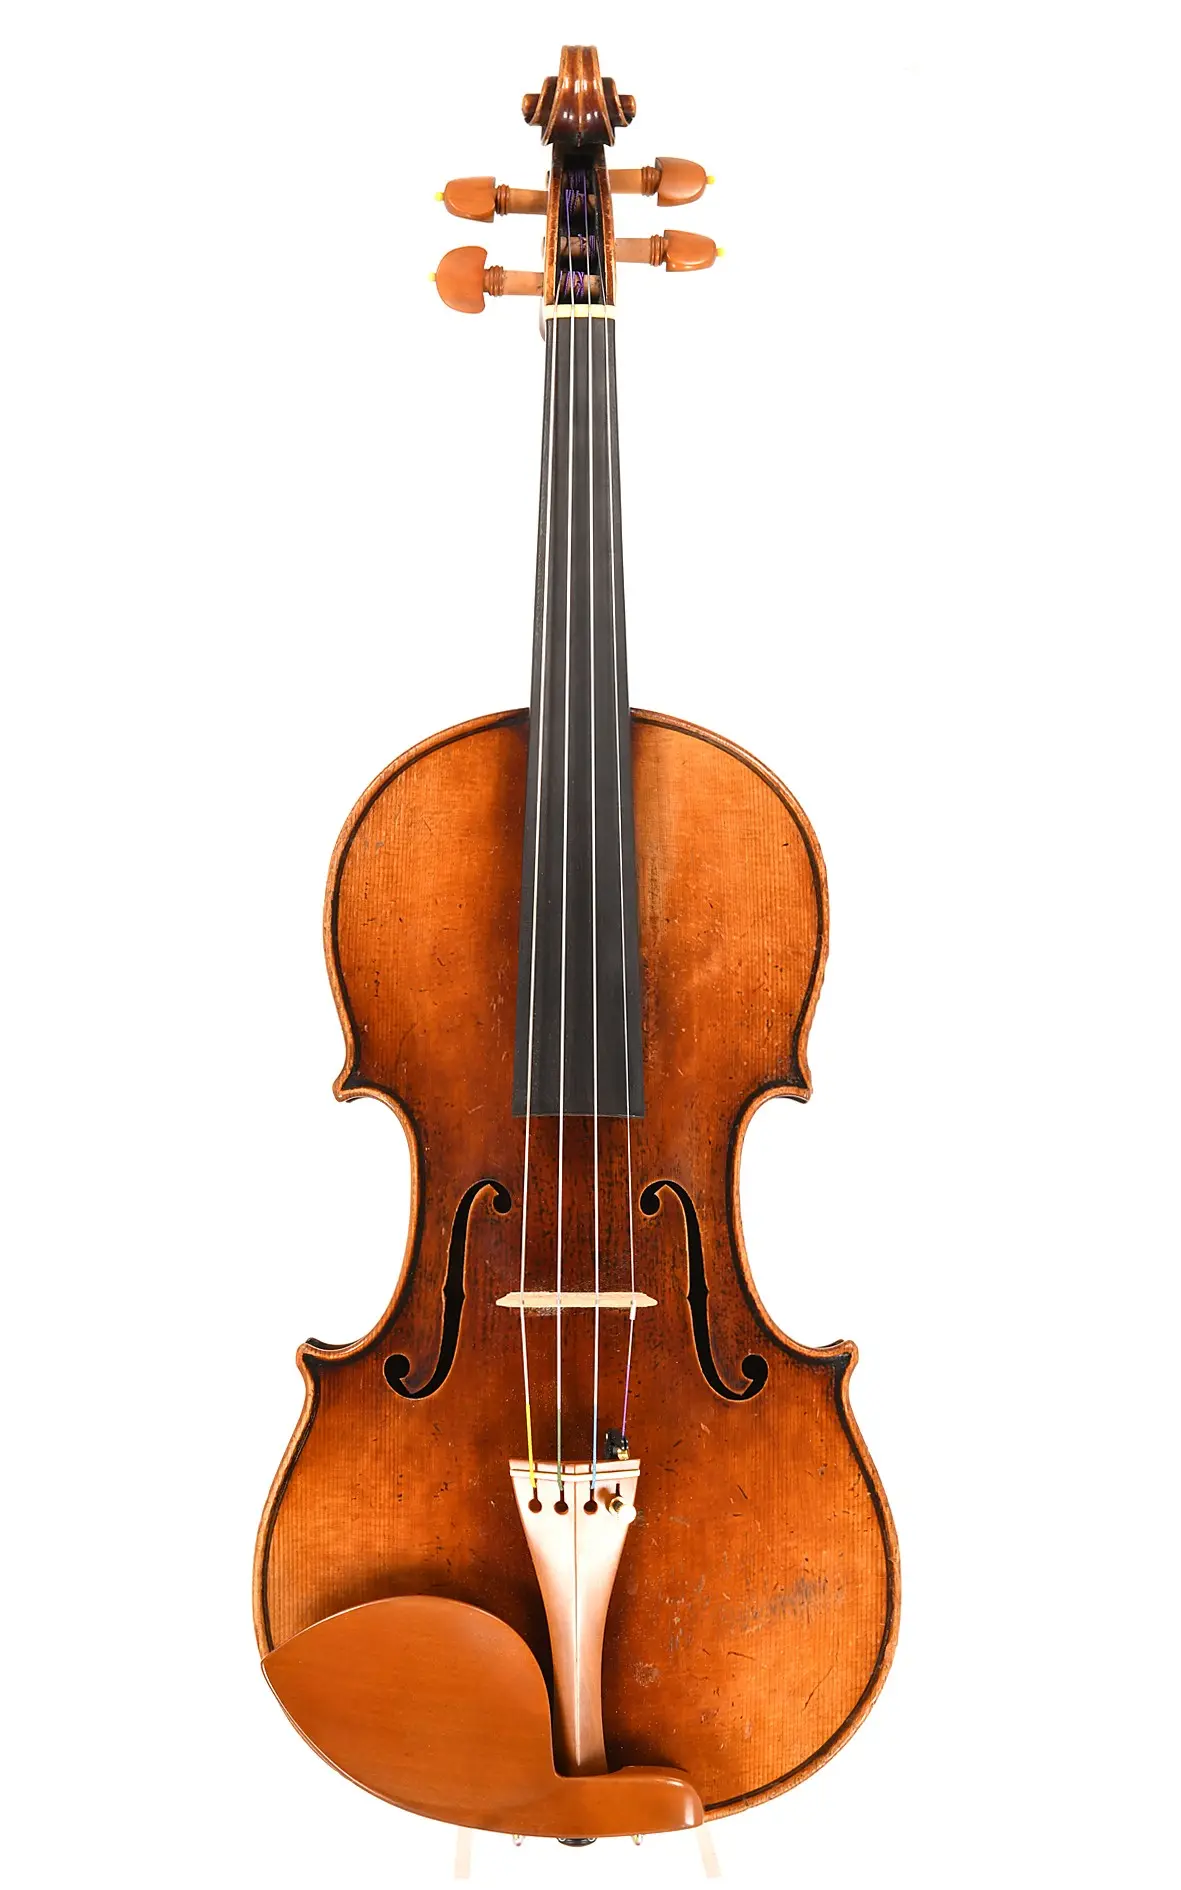 old violin - When was Old Violin written